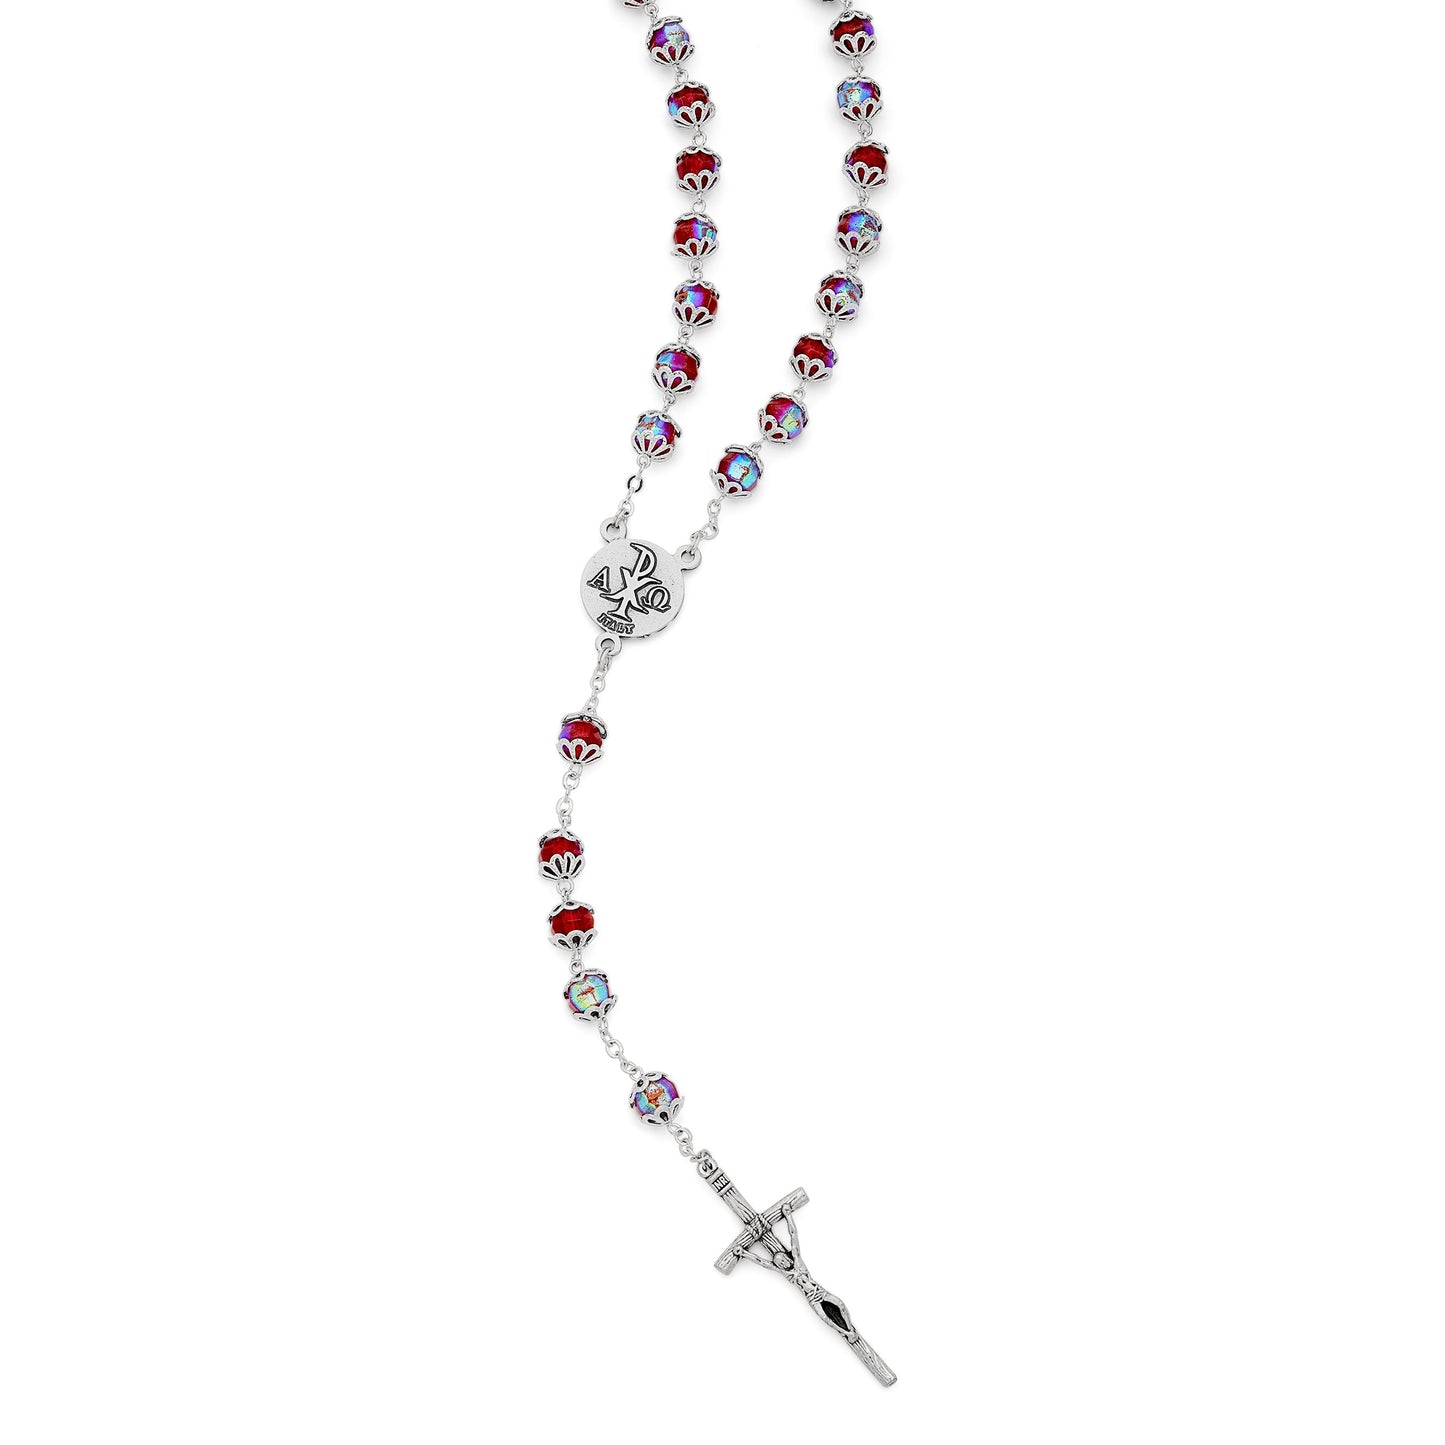 MONDO CATTOLICO Prayer Beads Mater Ecclesiae Red Rosary Faceted Beads